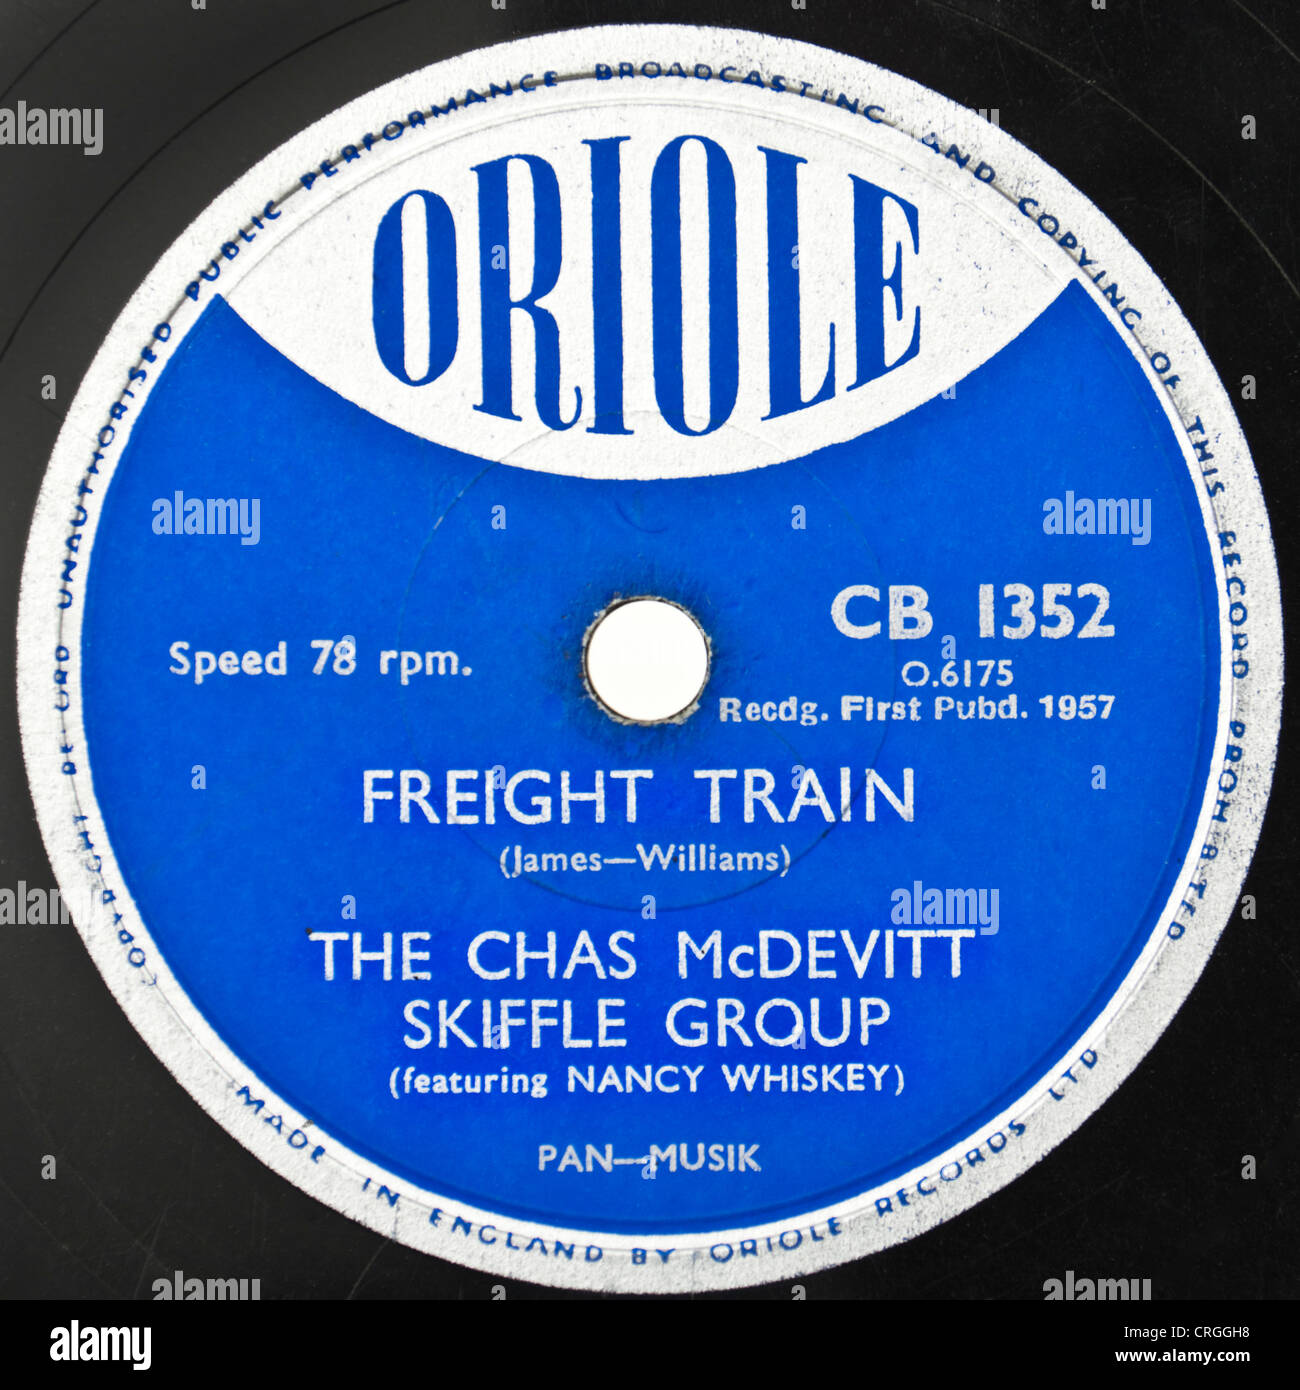 The Chas McDevitt Skiffle Group - Freight Train (featuring Nancy Whiskey) original 78rpm record (1957) Stock Photo